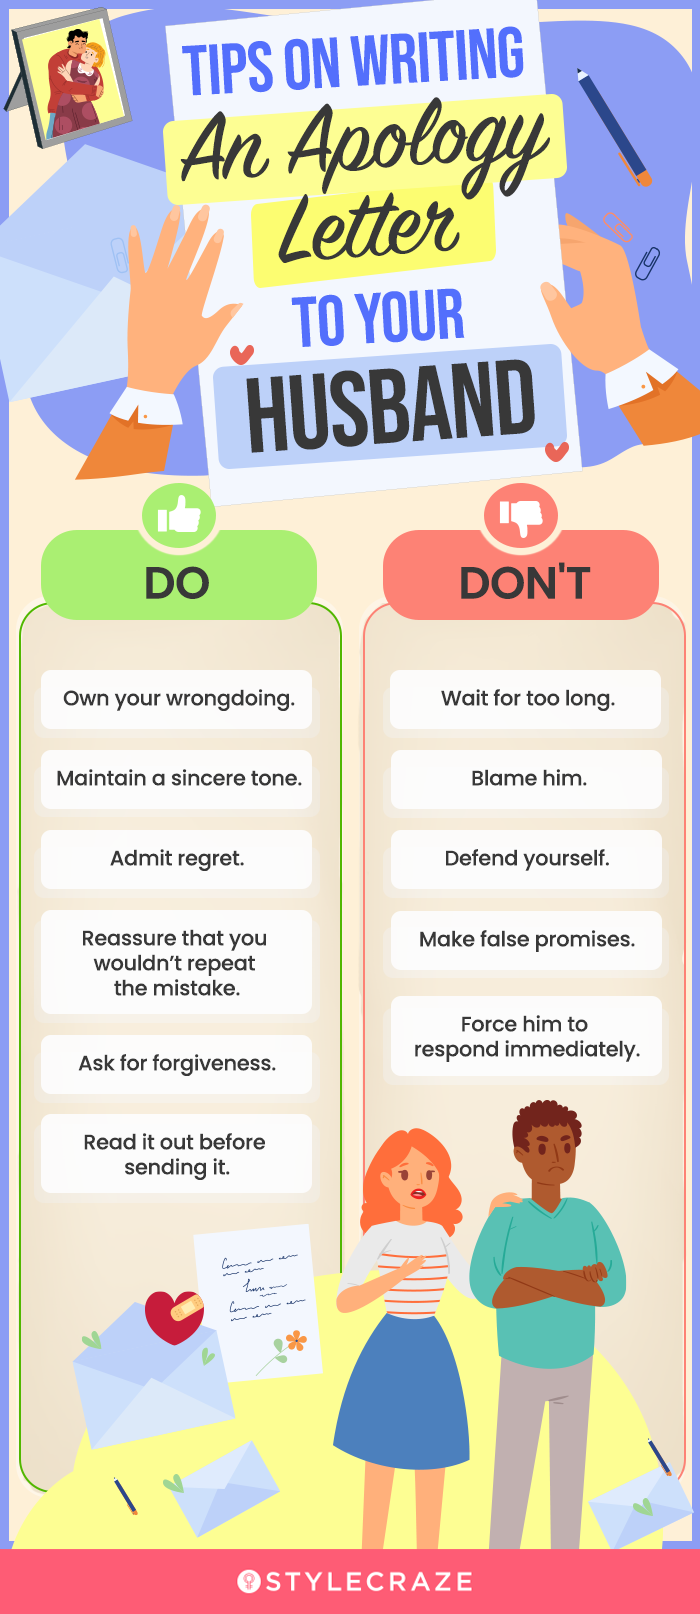 tips on writing an apology letter to your husband (infographic)